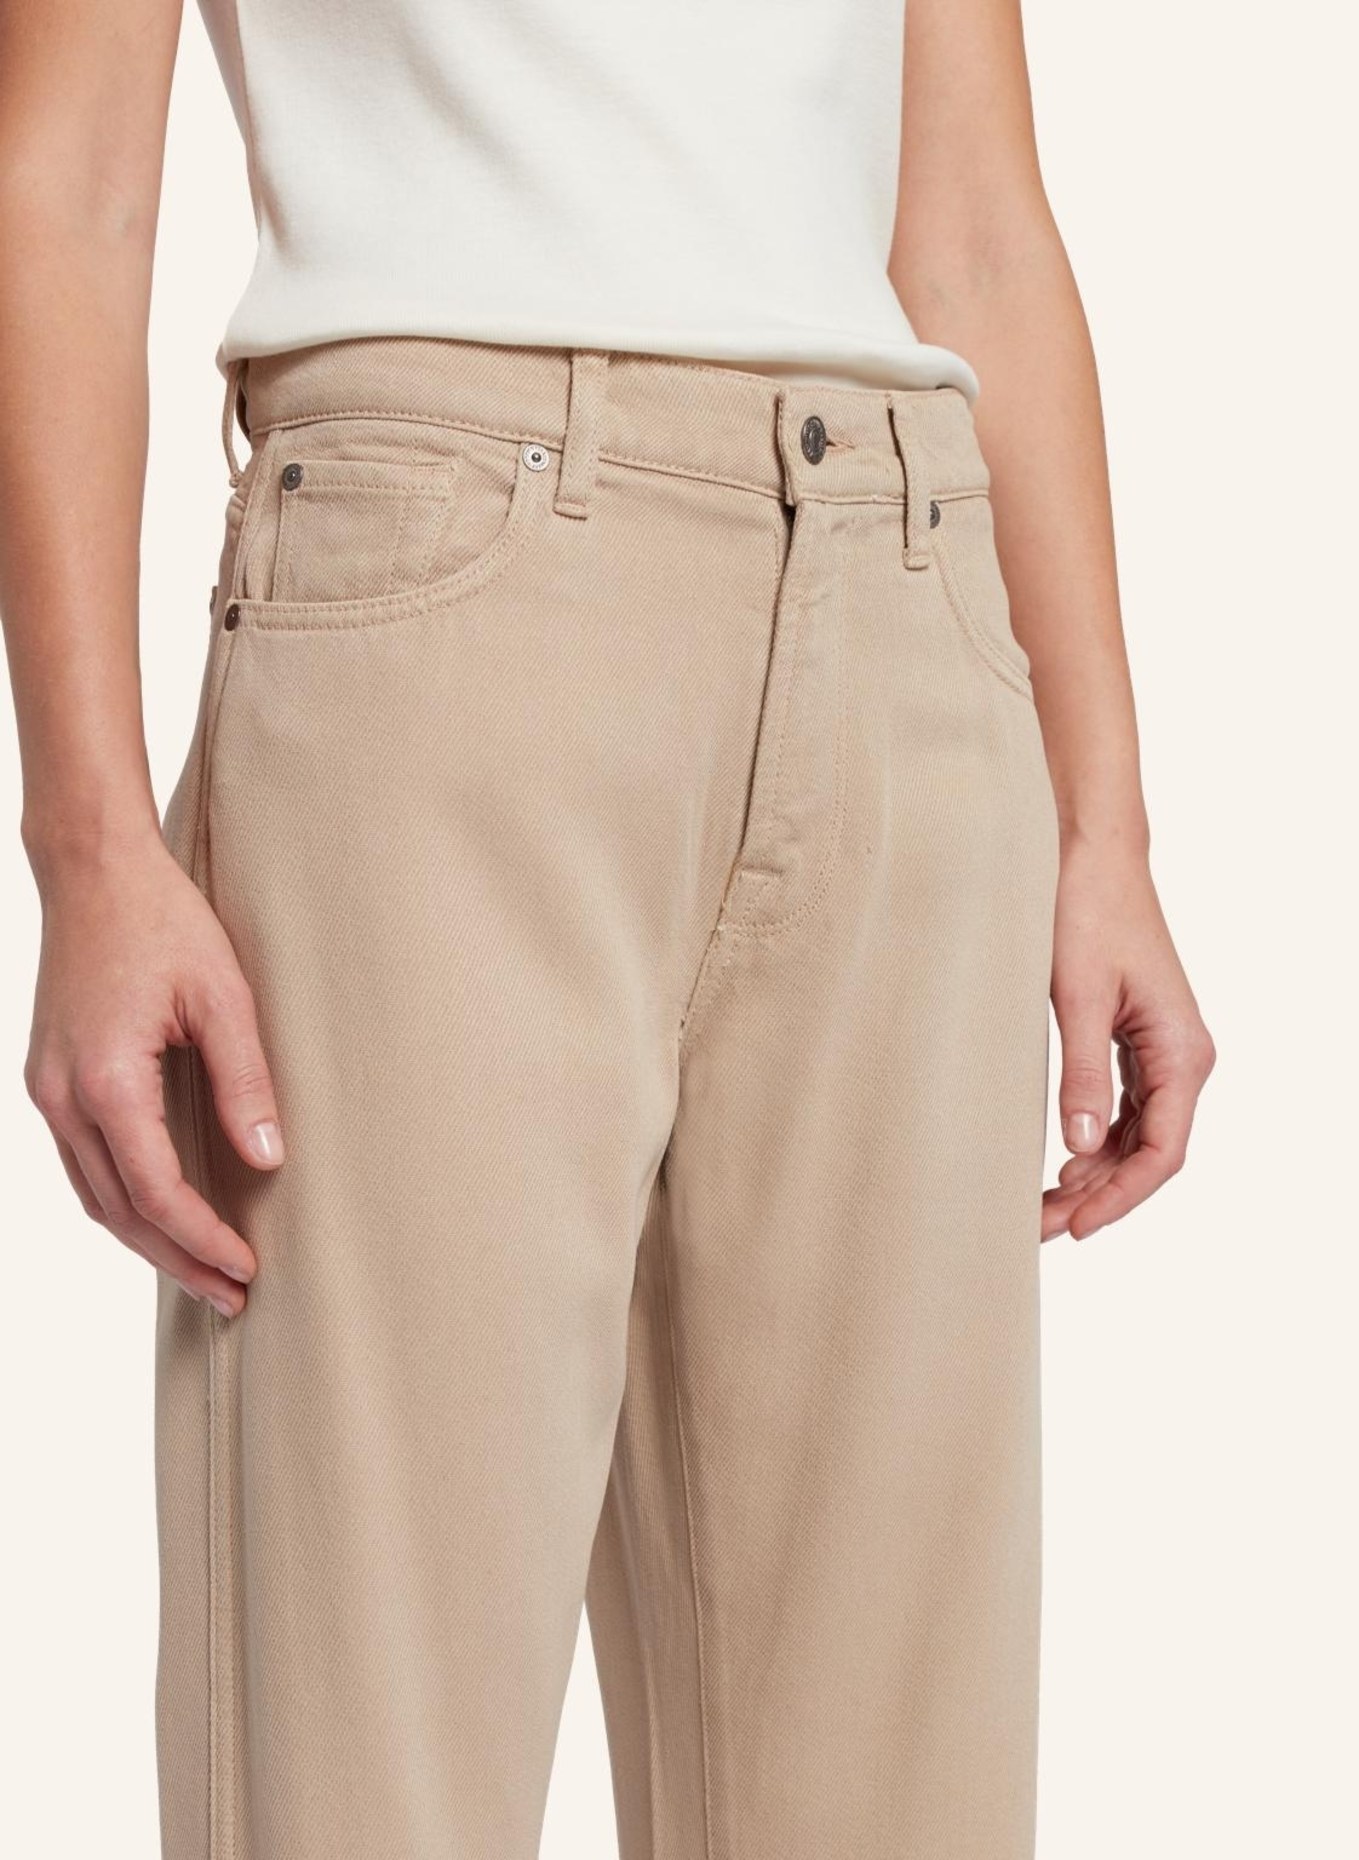 7 for all mankind Pant TESS TROUSER Straight fit, Farbe: BEIGE (Bild 3)